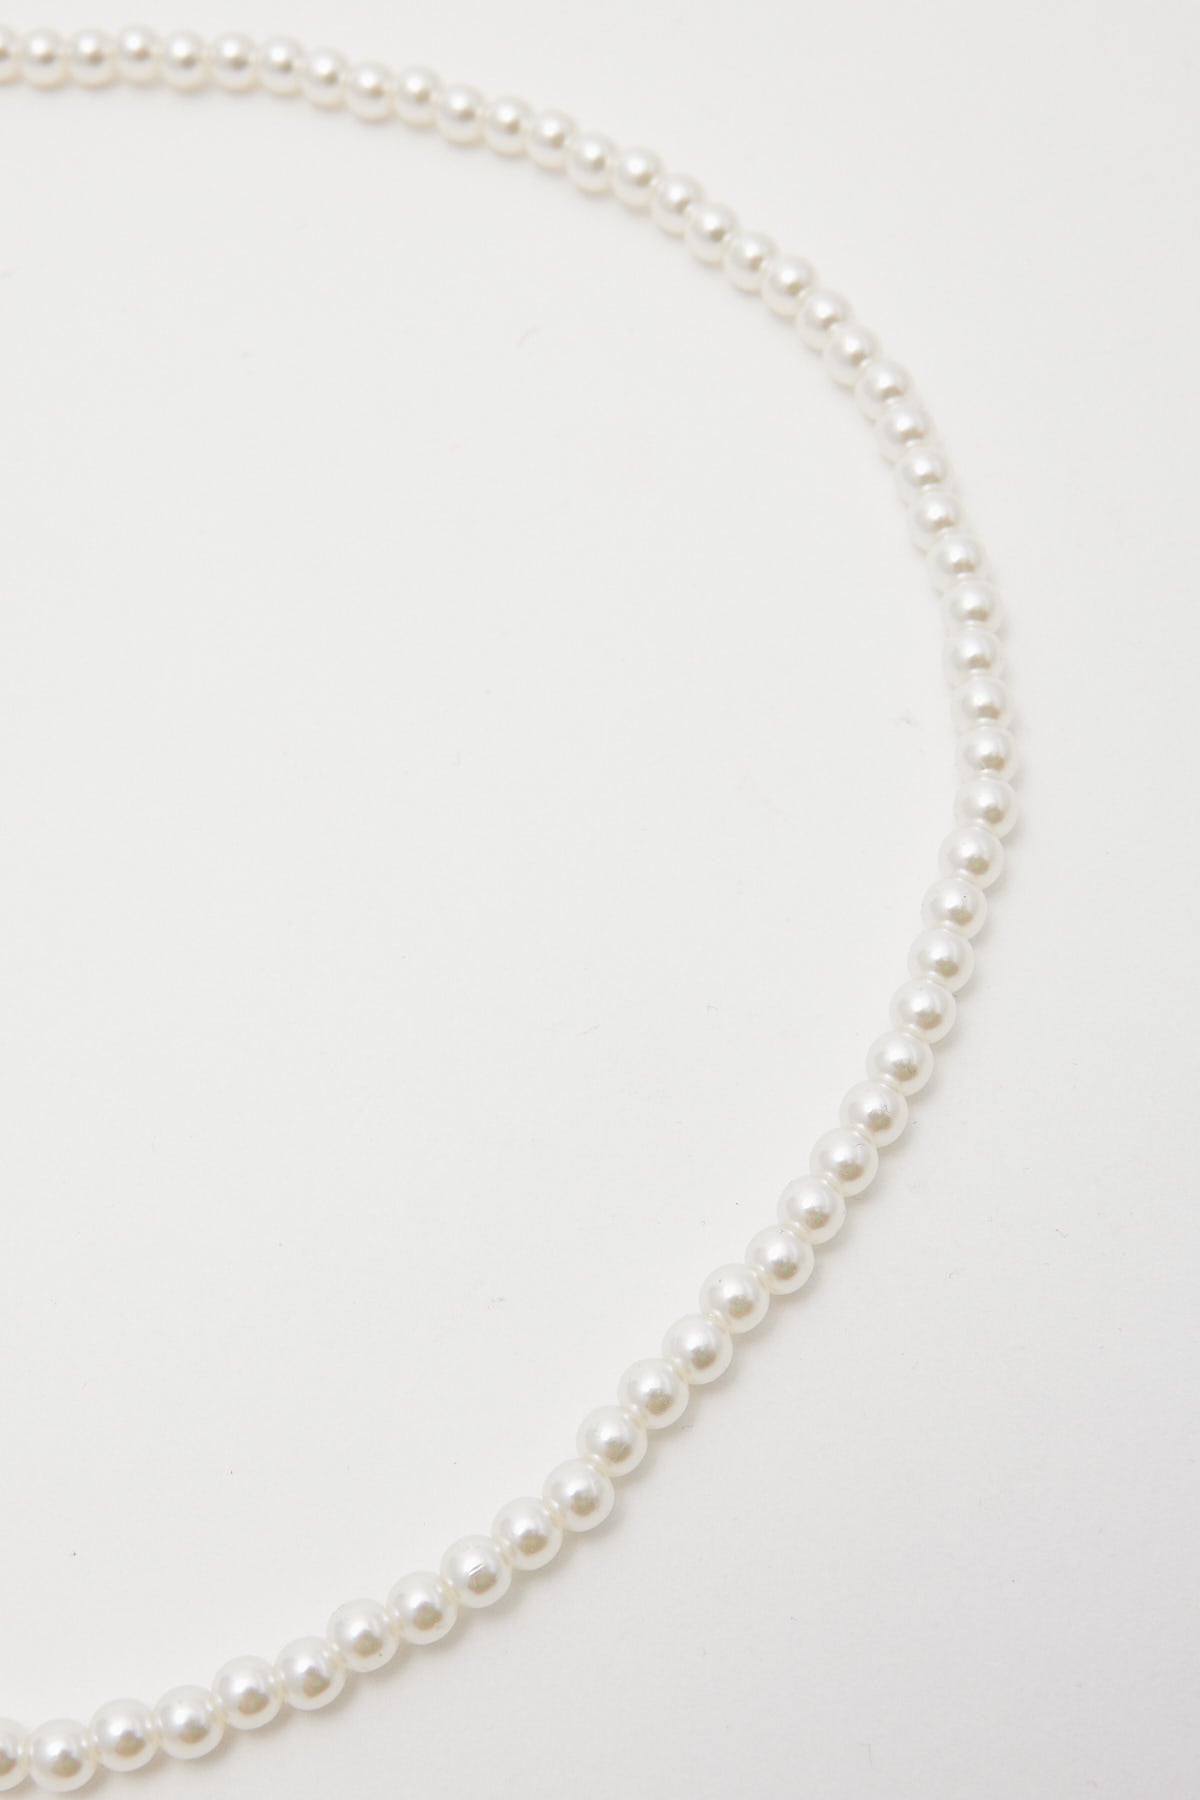 Neovision Lunar Pearl Necklace Pearl